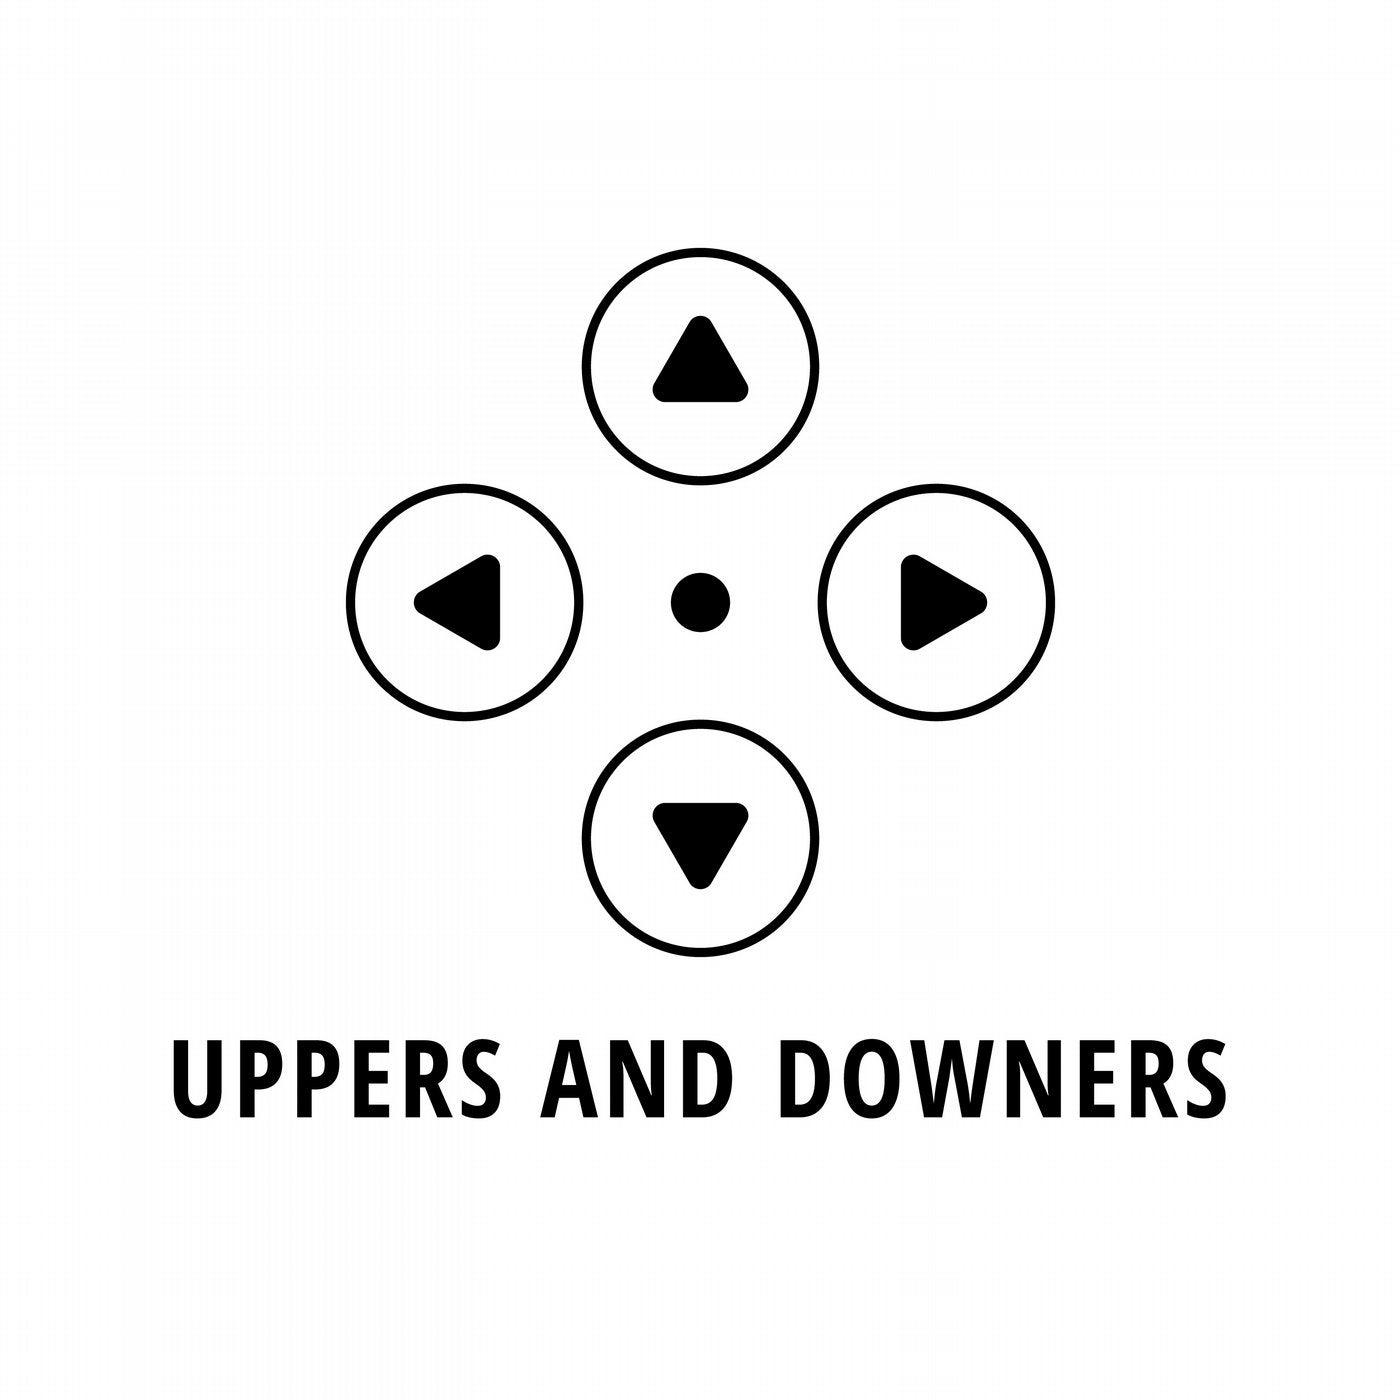 Uppers and Downers